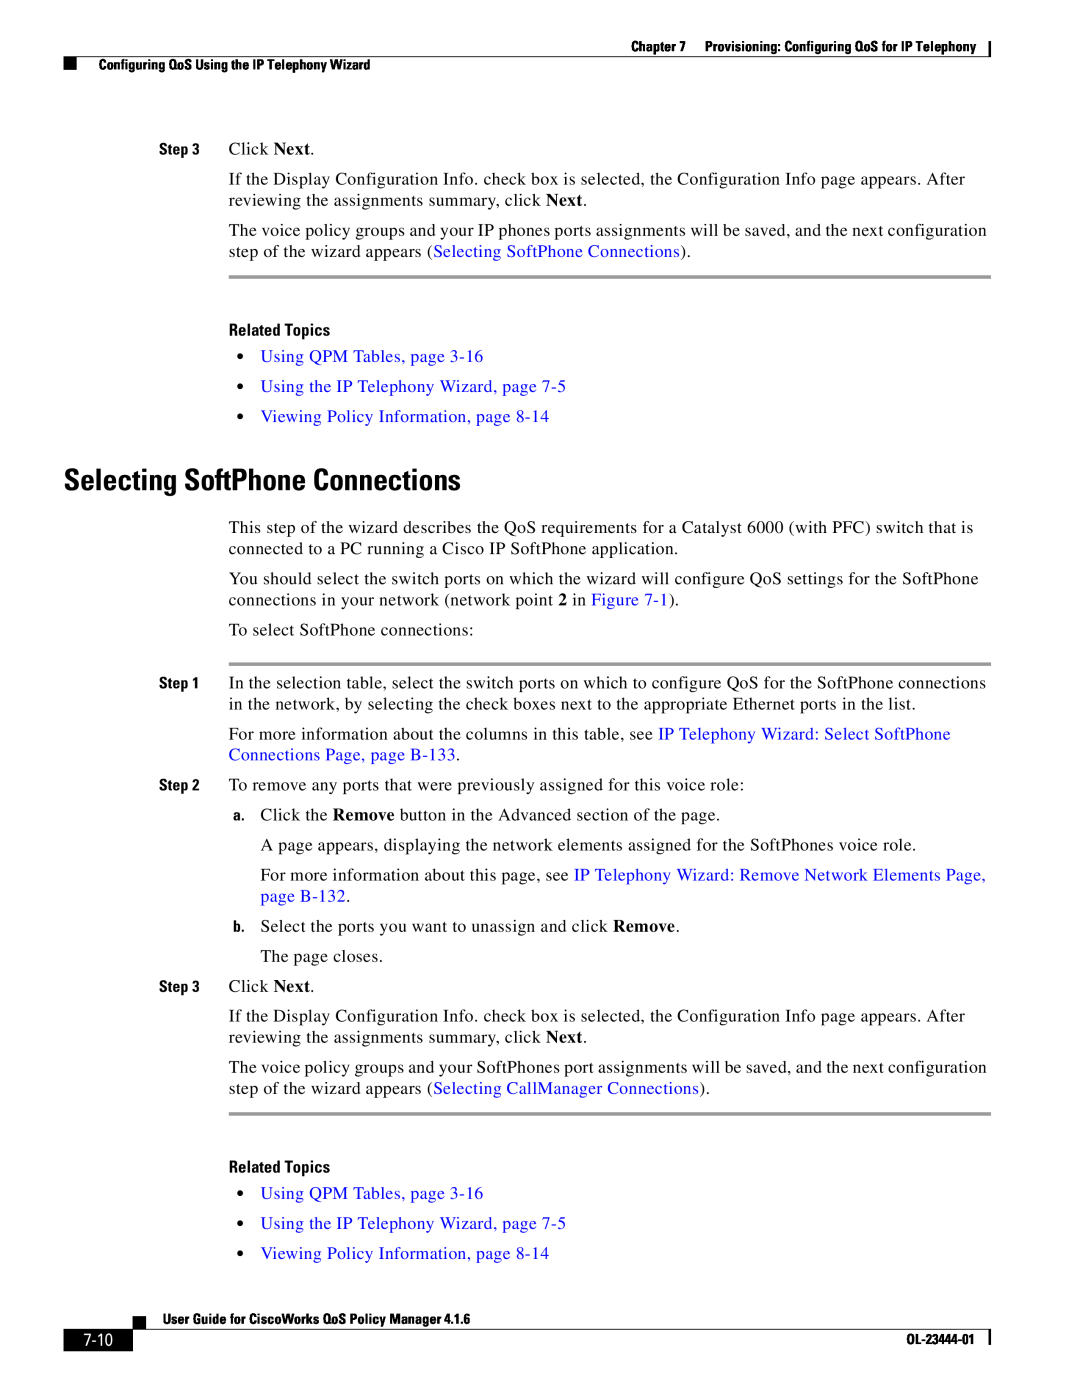 Cisco Systems 416 manual Selecting SoftPhone Connections, Using QPM Tables, page Using the IP Telephony Wizard, page, 7-10 